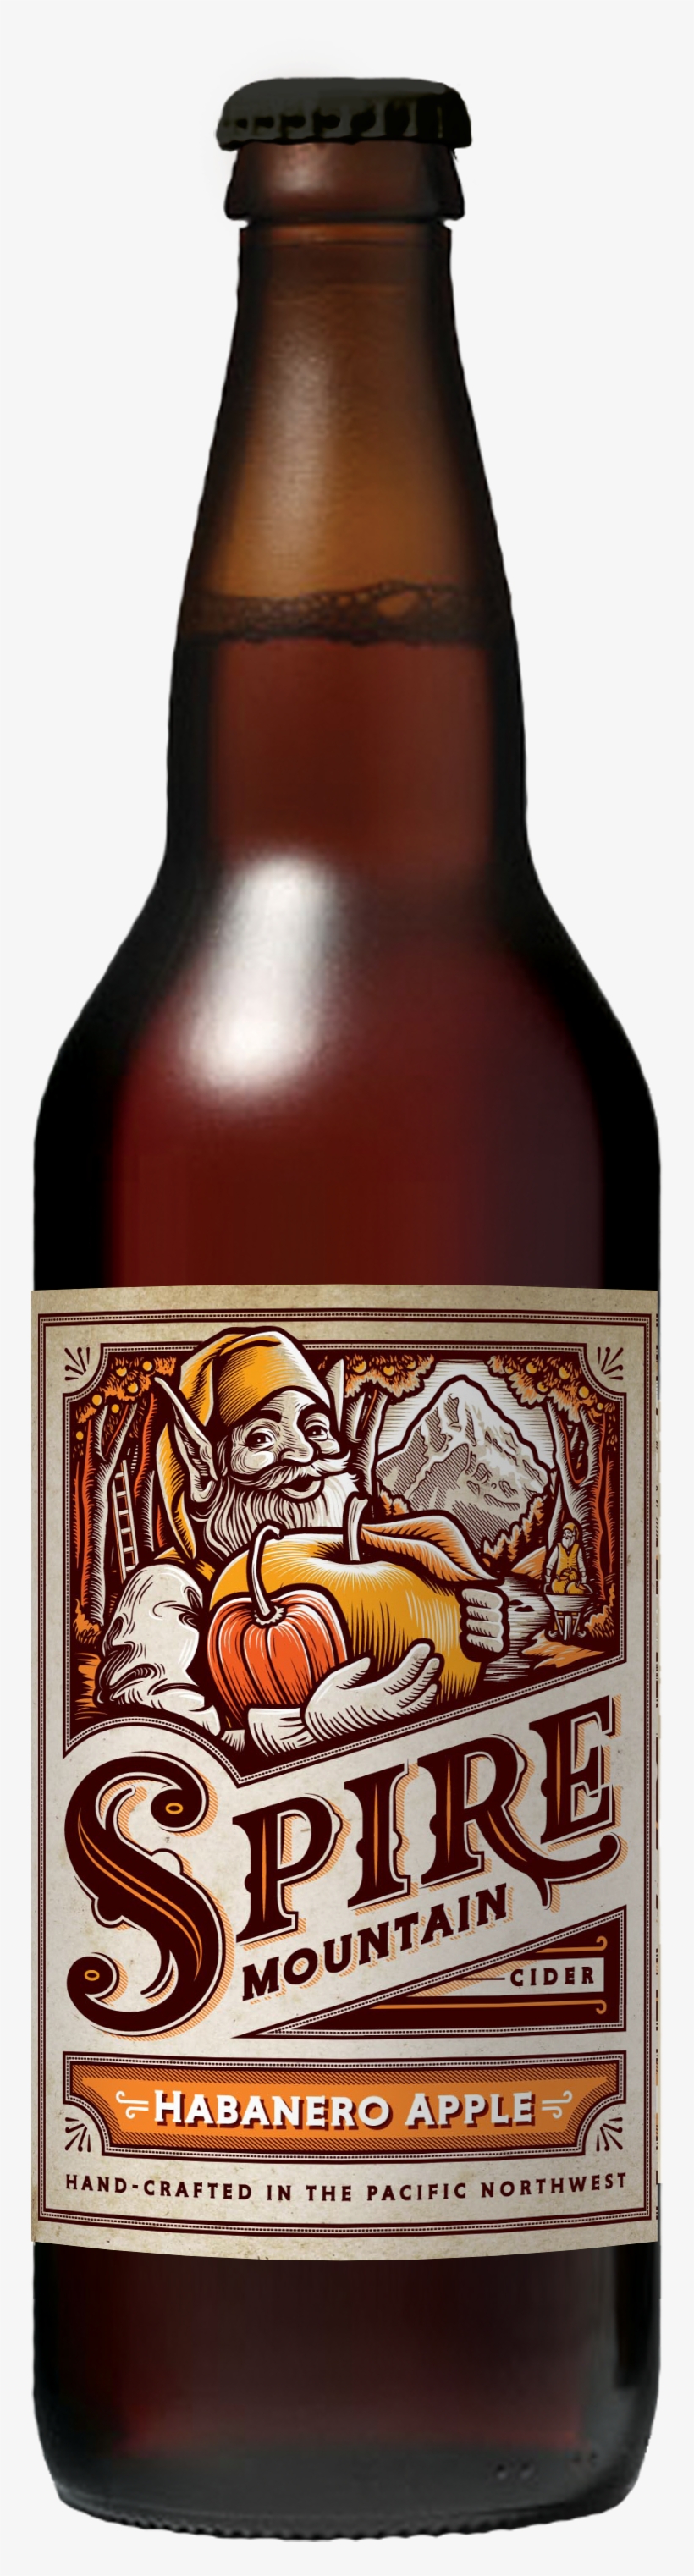 Spire Mountain Ciders - Spire Mountain Cider, transparent png #9195632